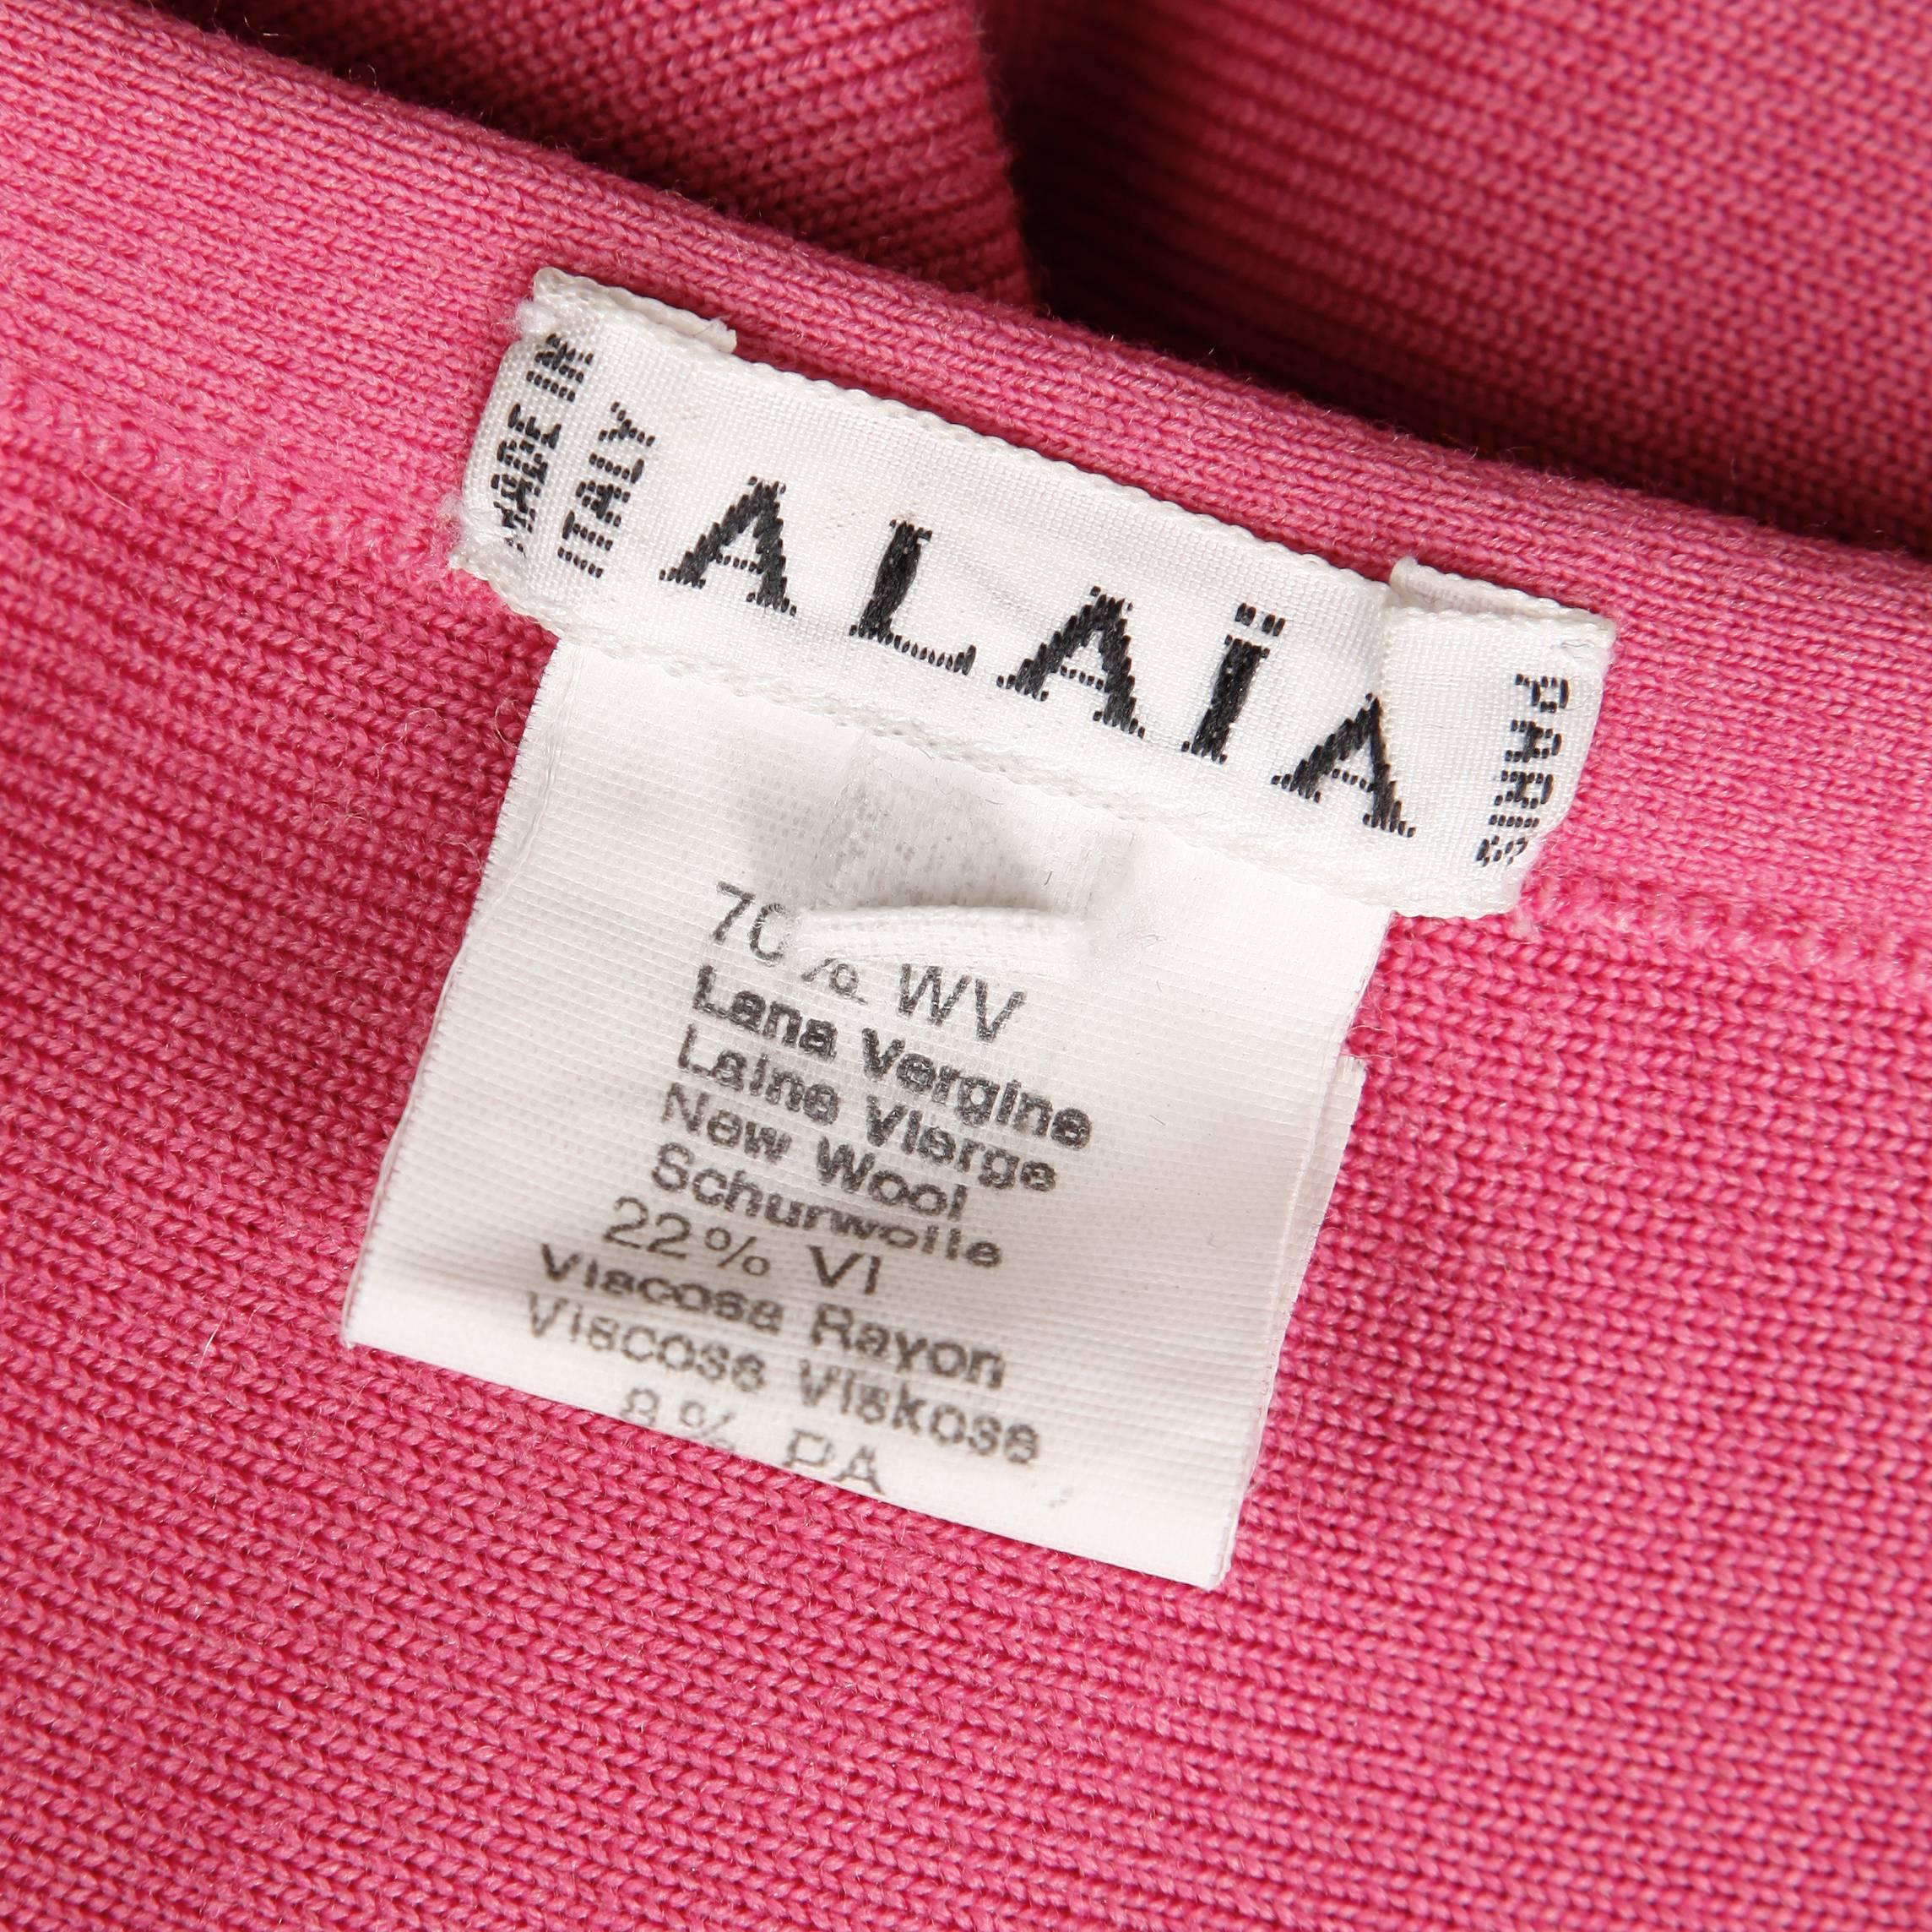 Incredible vintage Alaia skirt in two tone pink! Pleated detail with hand stitching on the reverse side of the knit. Front hook closure. Unlined. The fabric content is 70% wool, 22% rayon, 8% nylon. The marked size is small and the skirt fits true